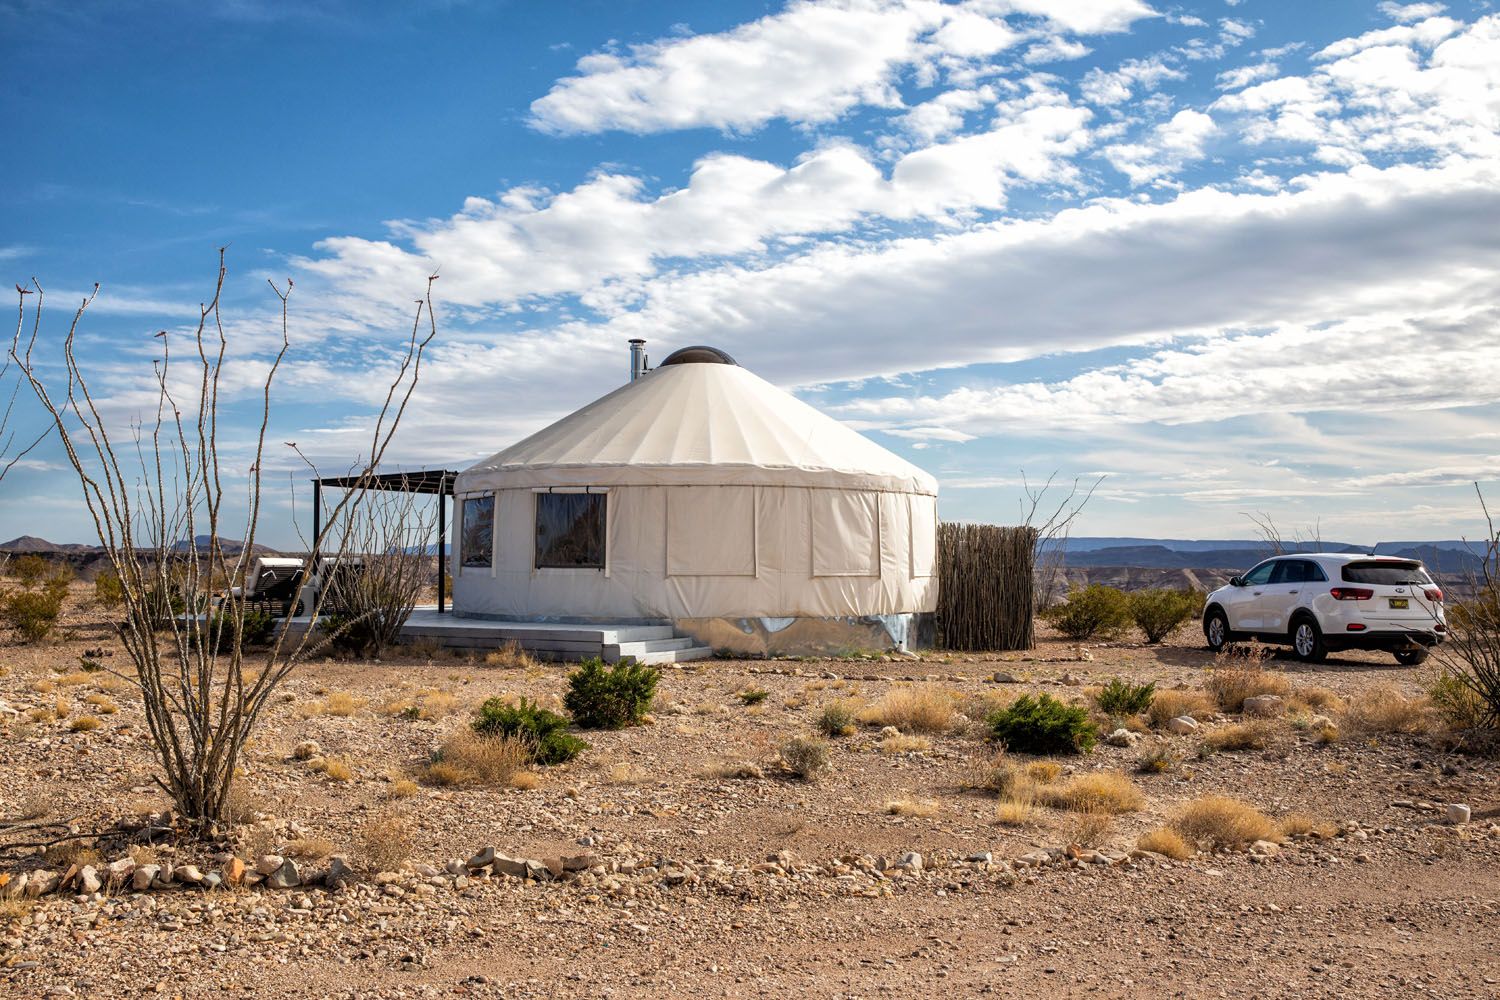 Local Chapter Yurt | Texas New Mexico road trip itinerary